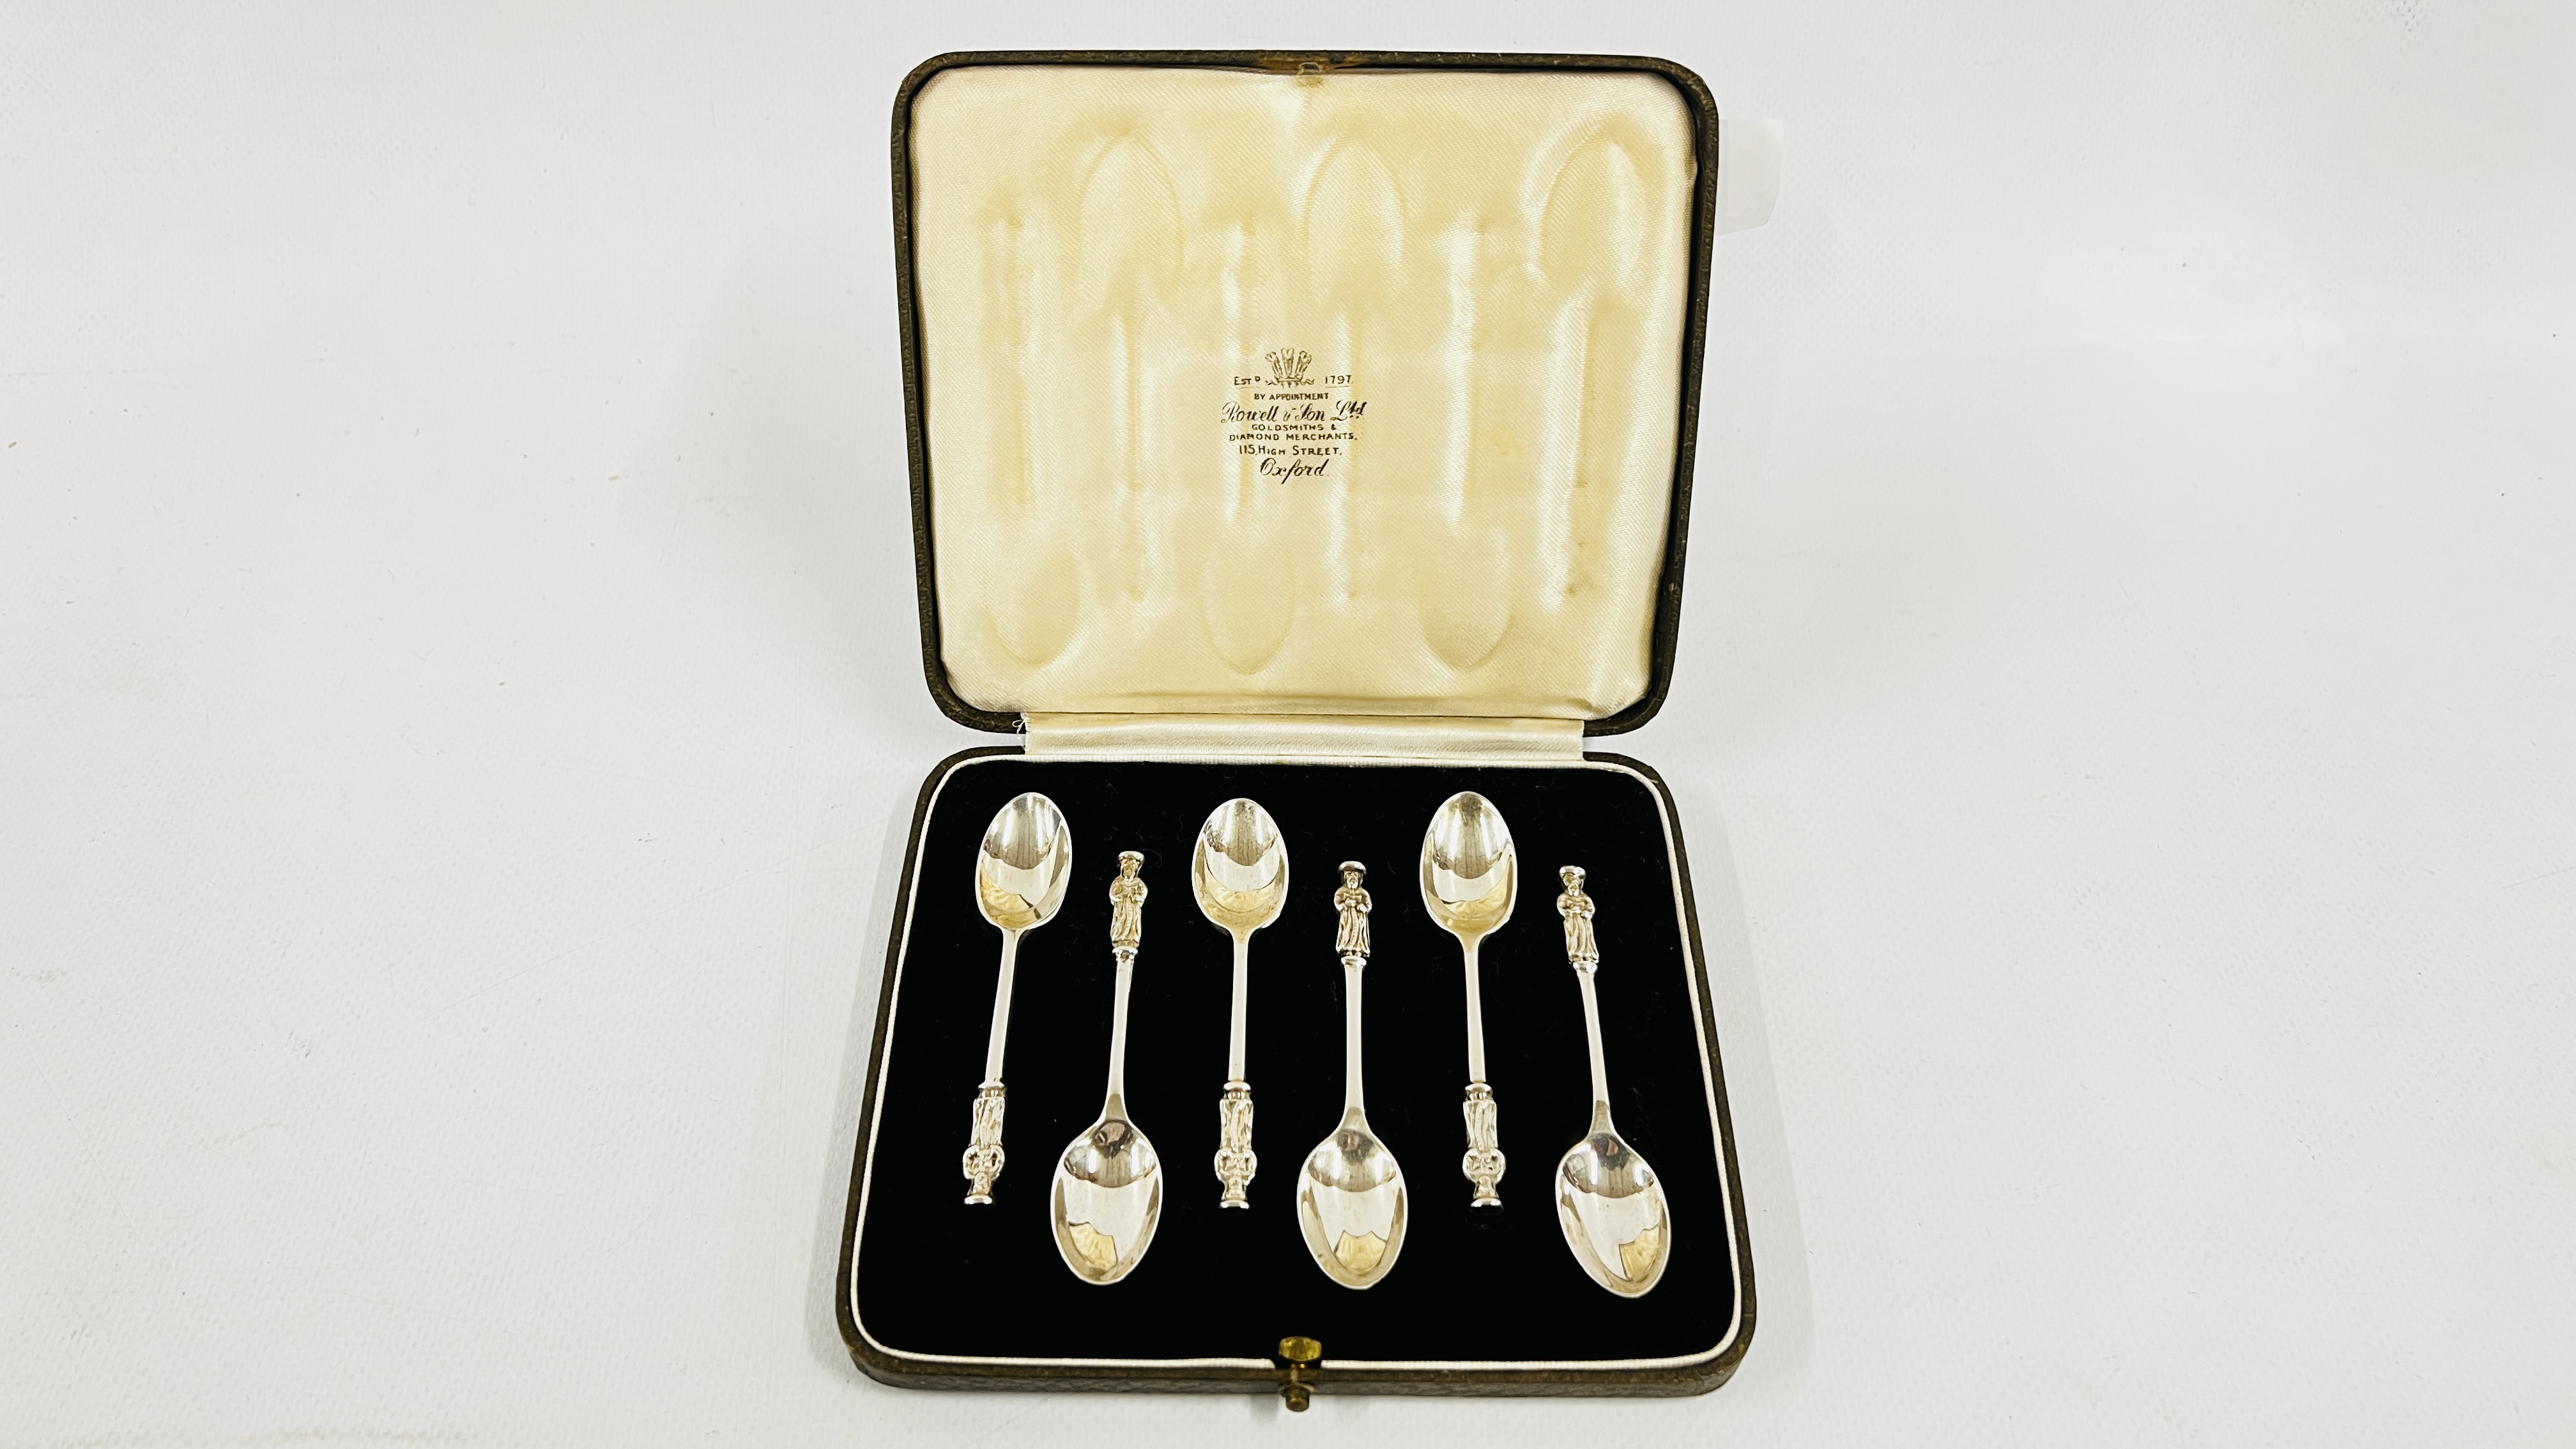 A CASED SET OF 6 SILVER COFFEE SPOONS, LONDON 1938, MAKER JOSIAH WILLIAMS & CO.